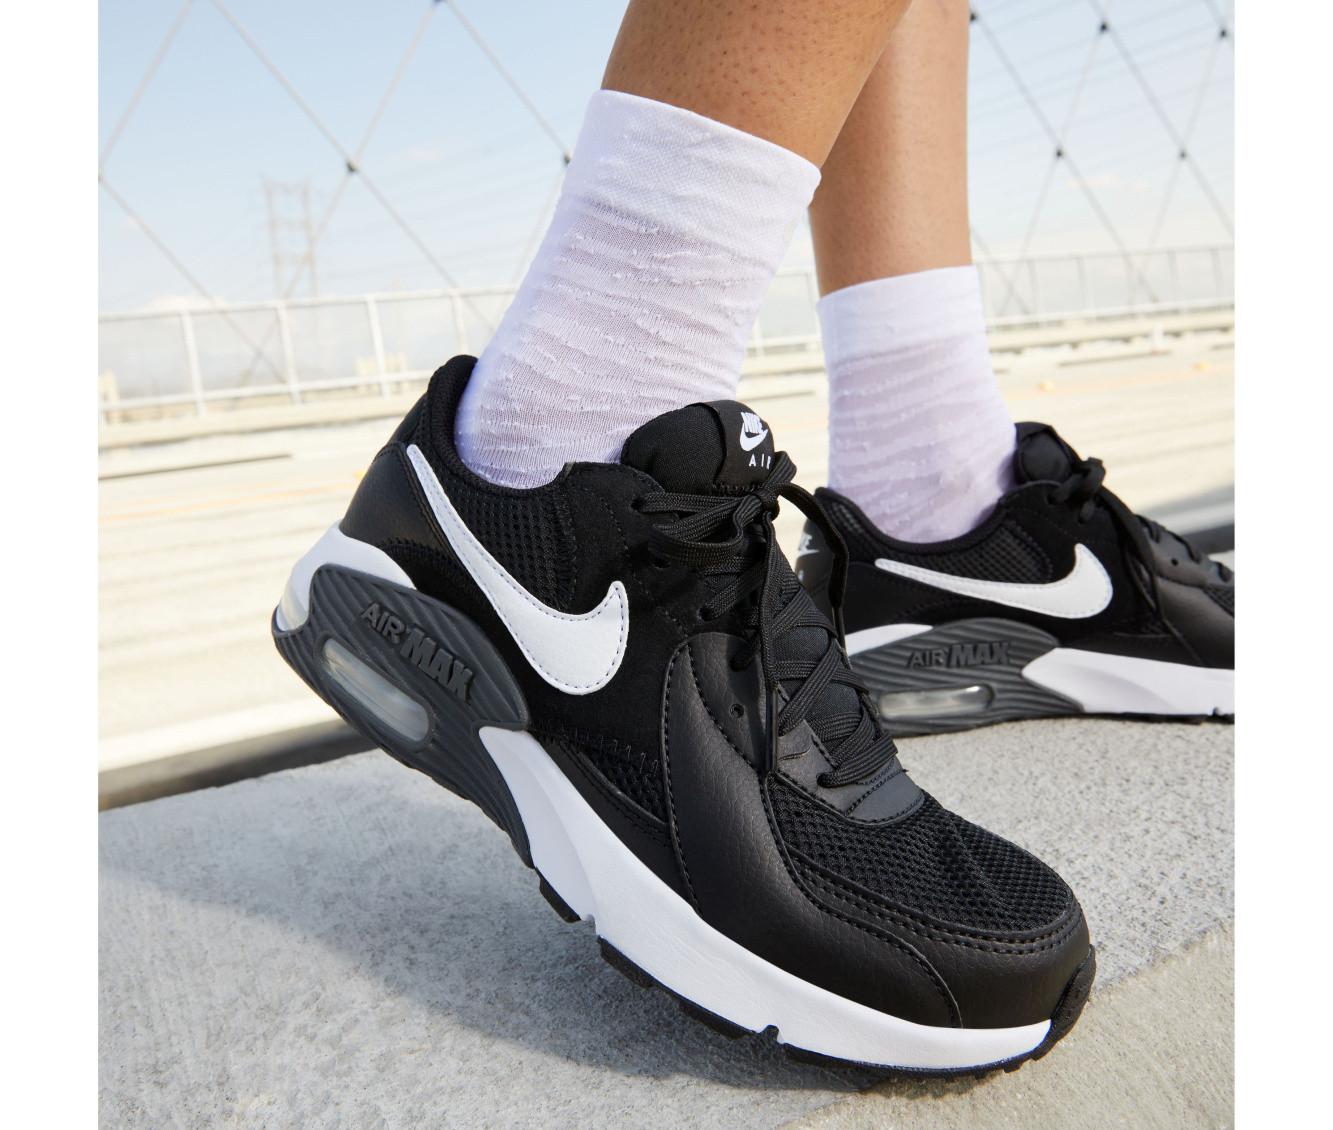 women's nike air max athletic shoes